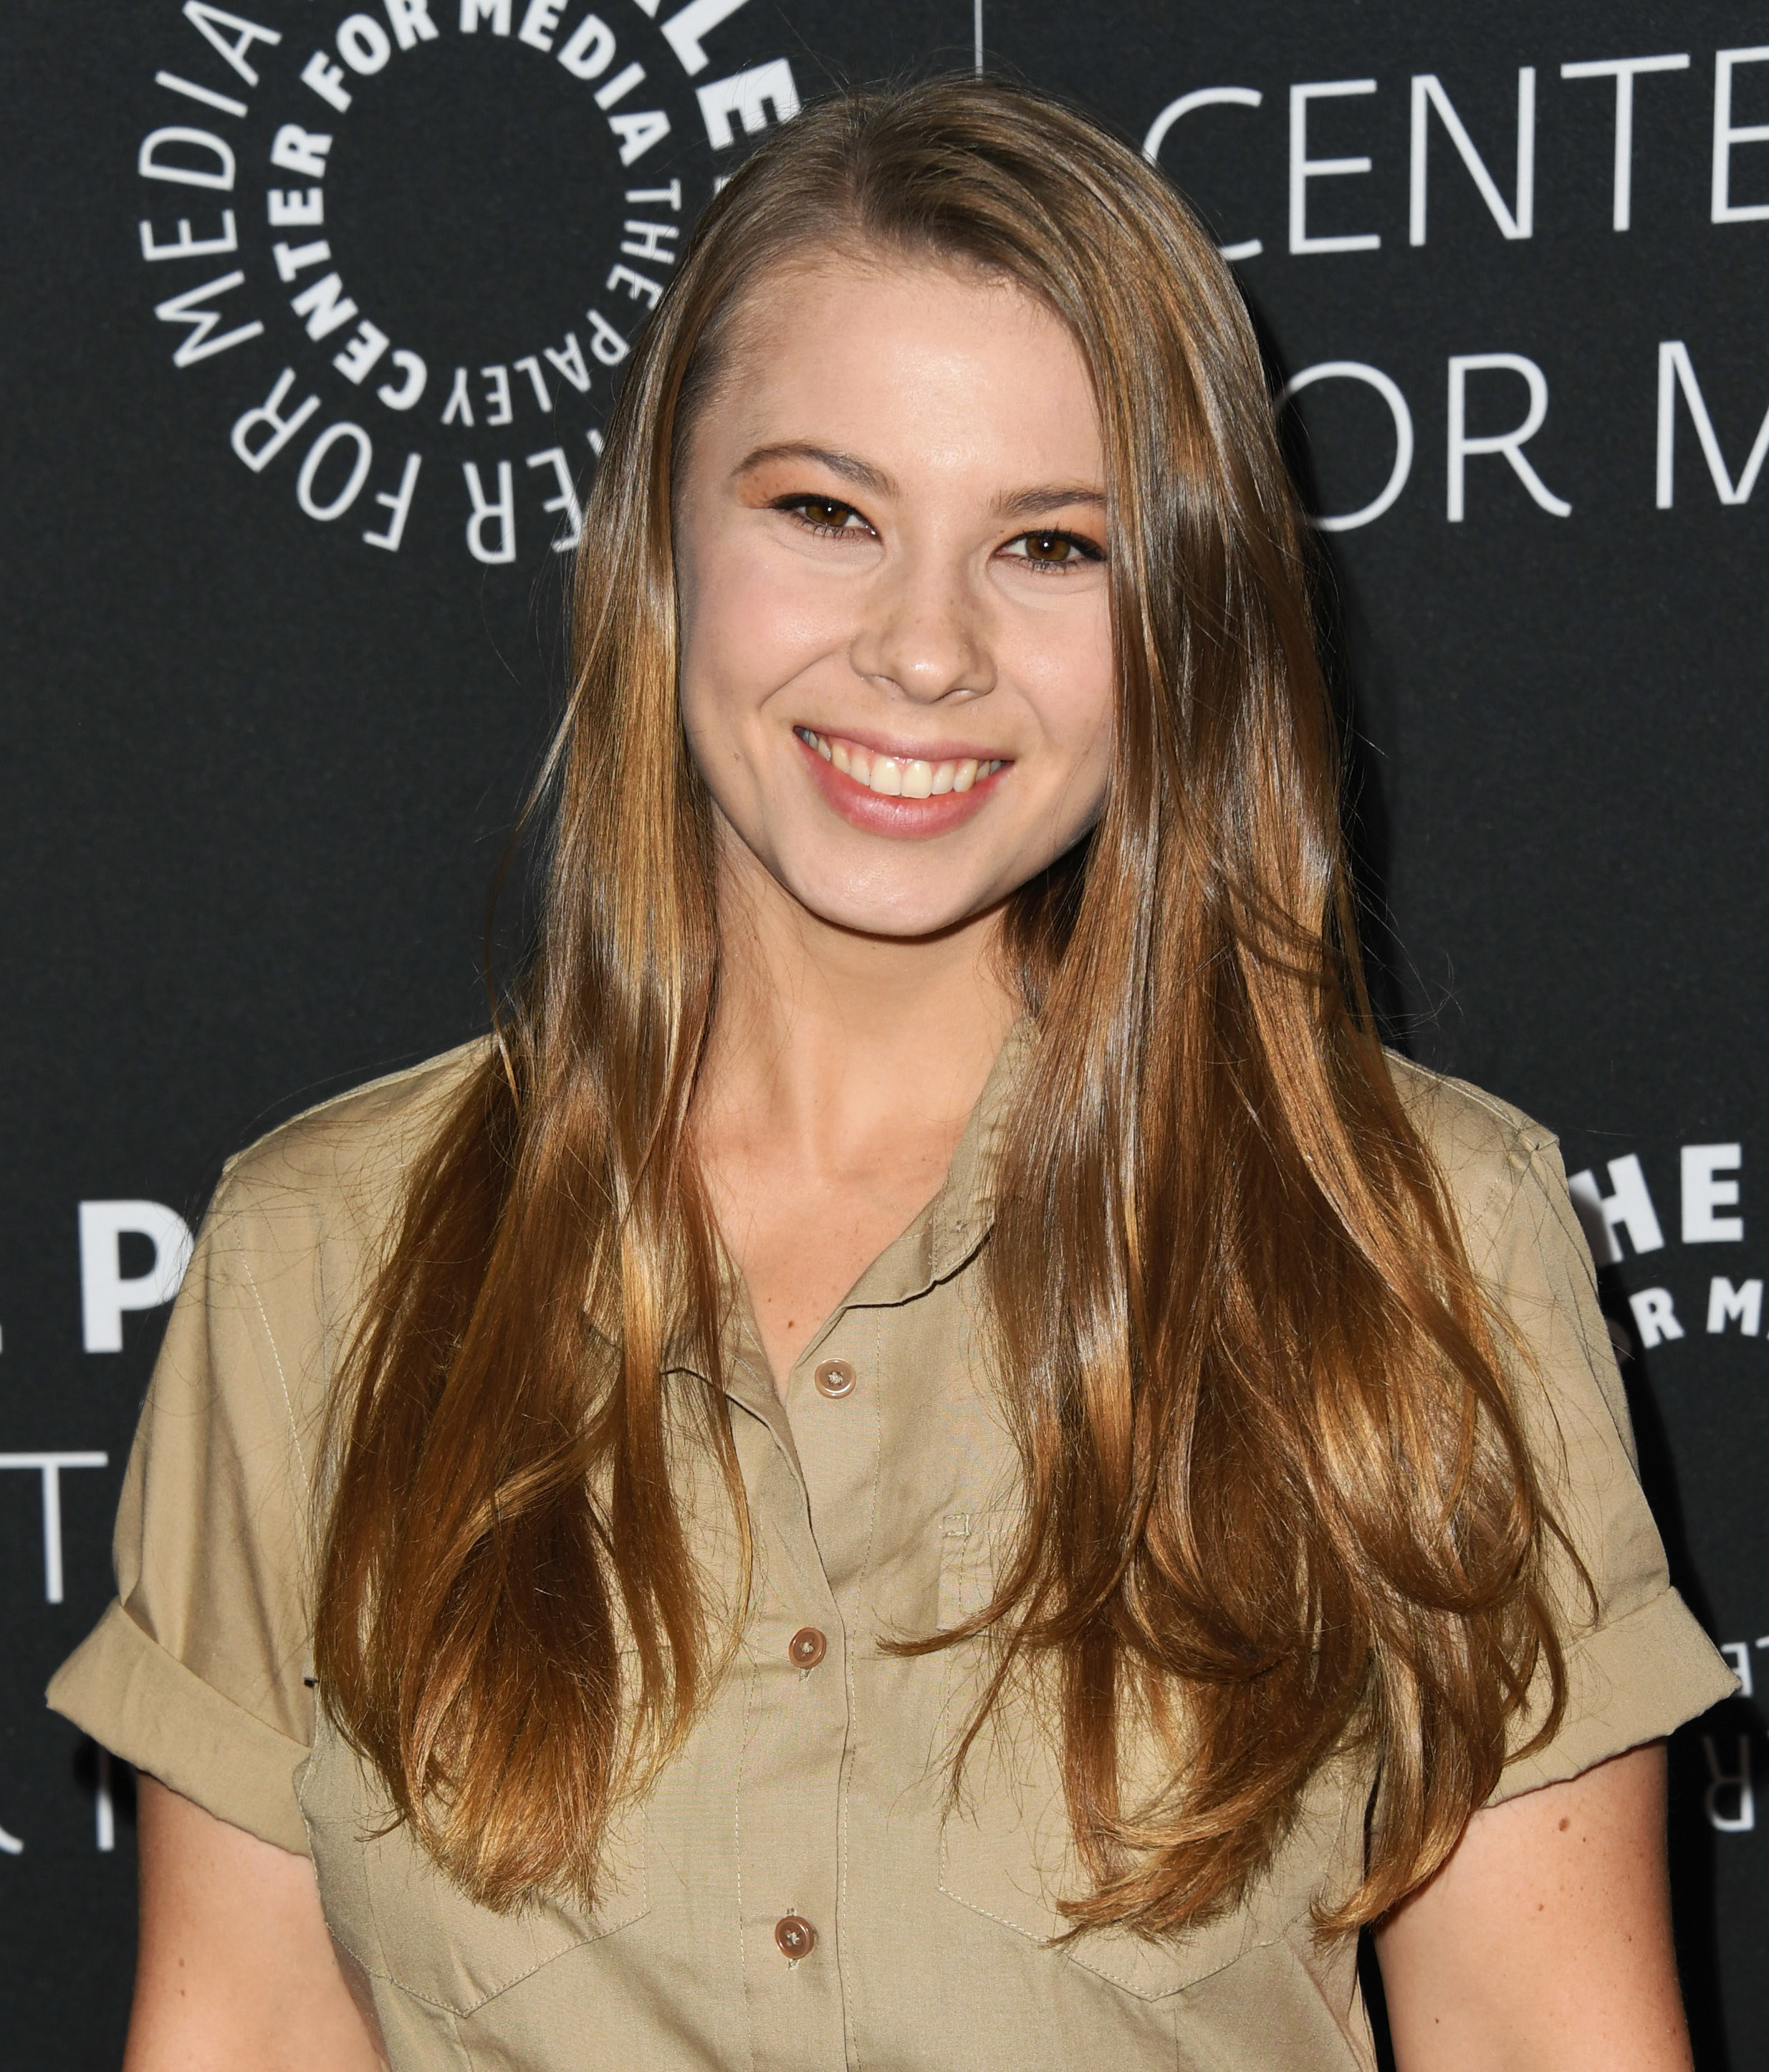 Bindi Irwin attends The Paley Center For Media Presents: An Evening With The Irwins: &quot;Crikey! It&#x27;s The Irwins&quot; Screening And Conversation at The Paley Center for Media on May 03, 2019 in Beverly Hills, California